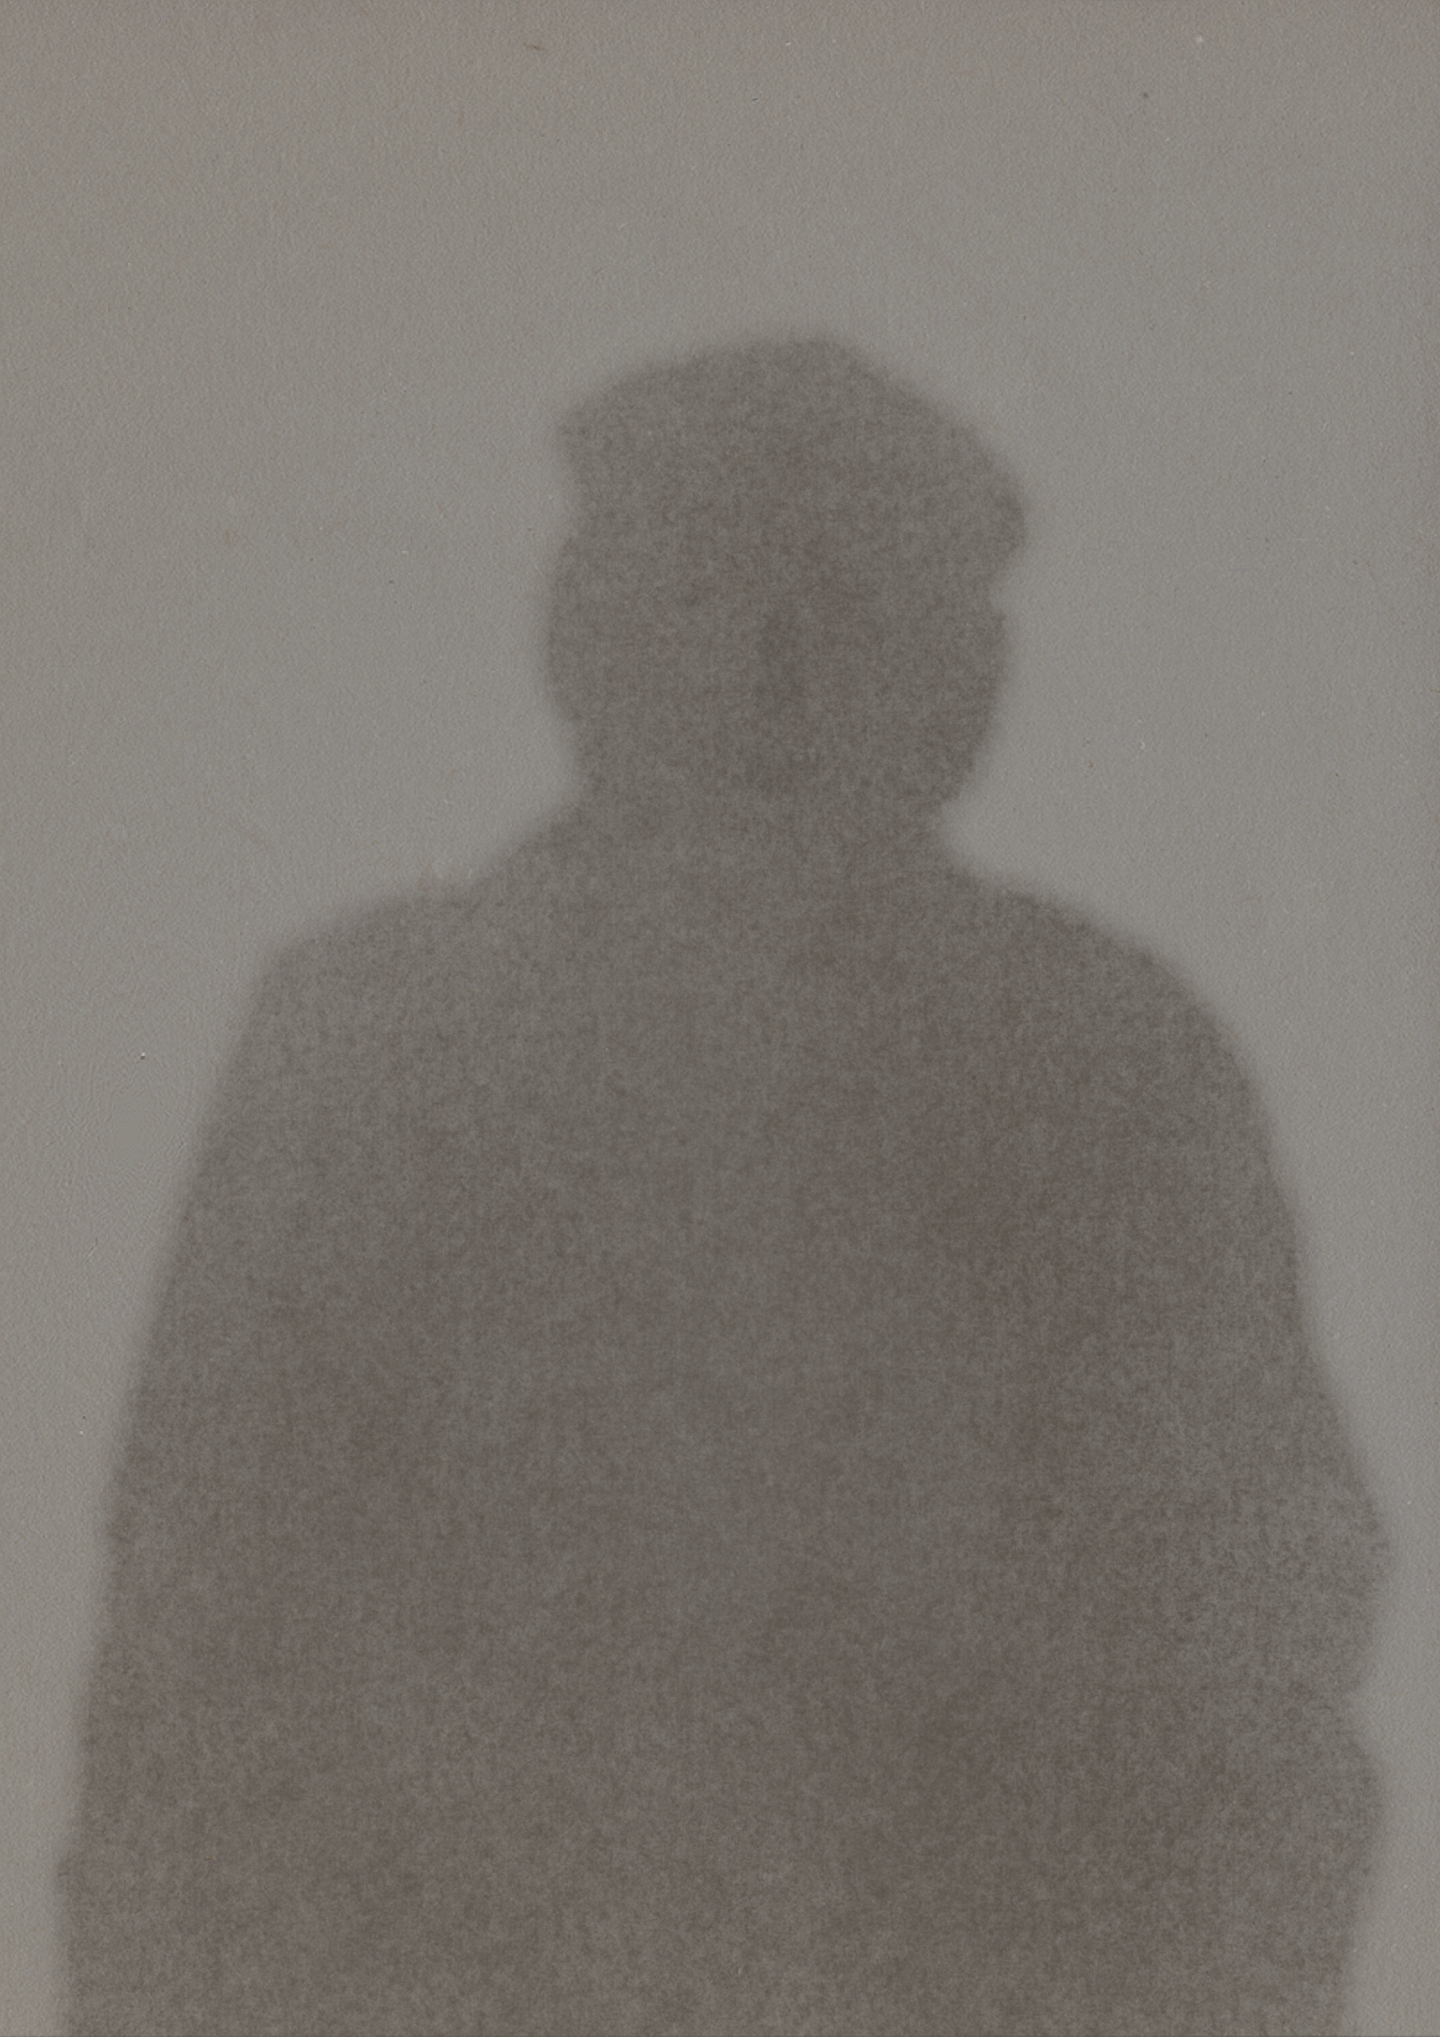 A blurry shadow/outline of somebody, they appear to be an older man. There is a face present within the mans outline but not quite enough to focus on. (Digital - pencil texture)